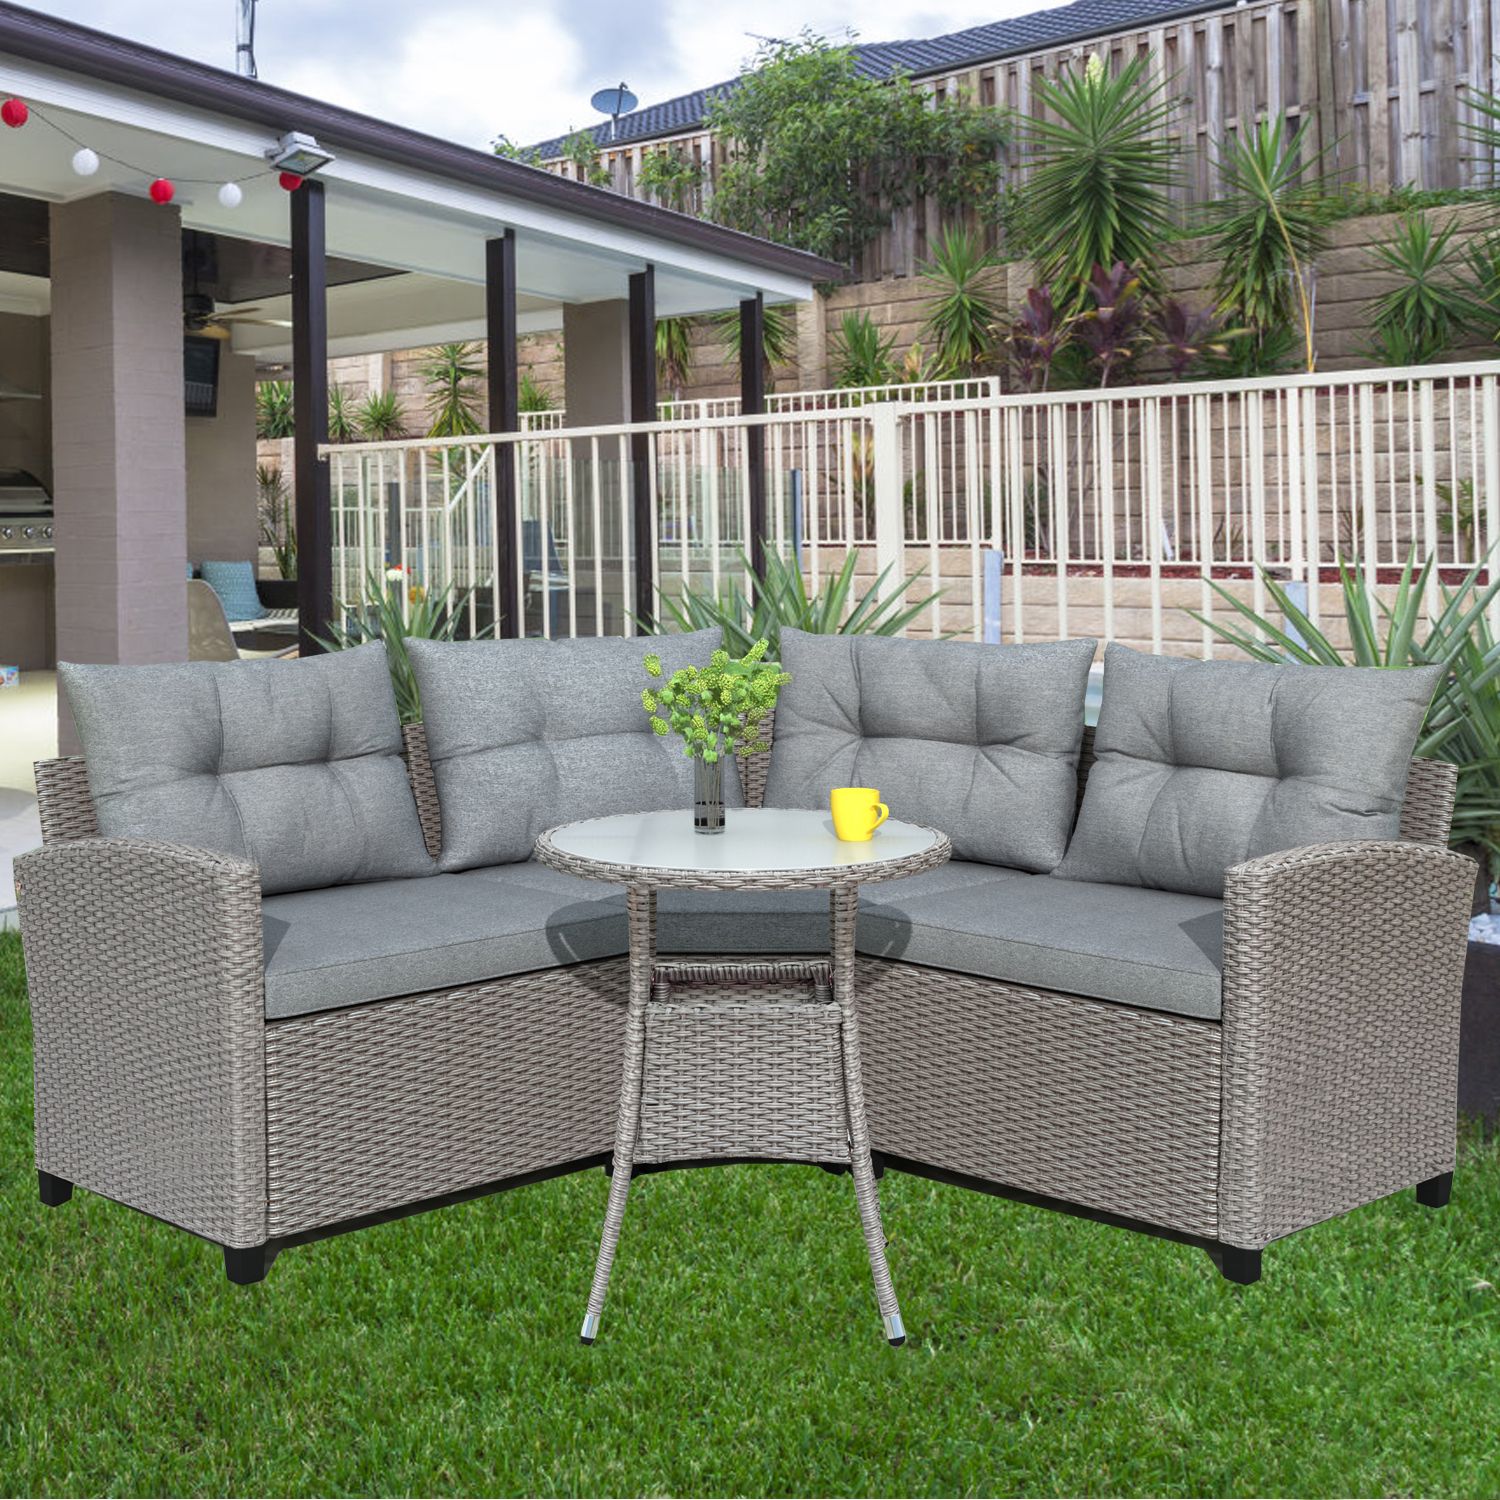 4 Piece Outdoor Patio Sofa Furniture Sets, Gray Rattan Wicker Patio Set In Newest Gray Outdoor Table And Loveseat Sets (View 2 of 15)